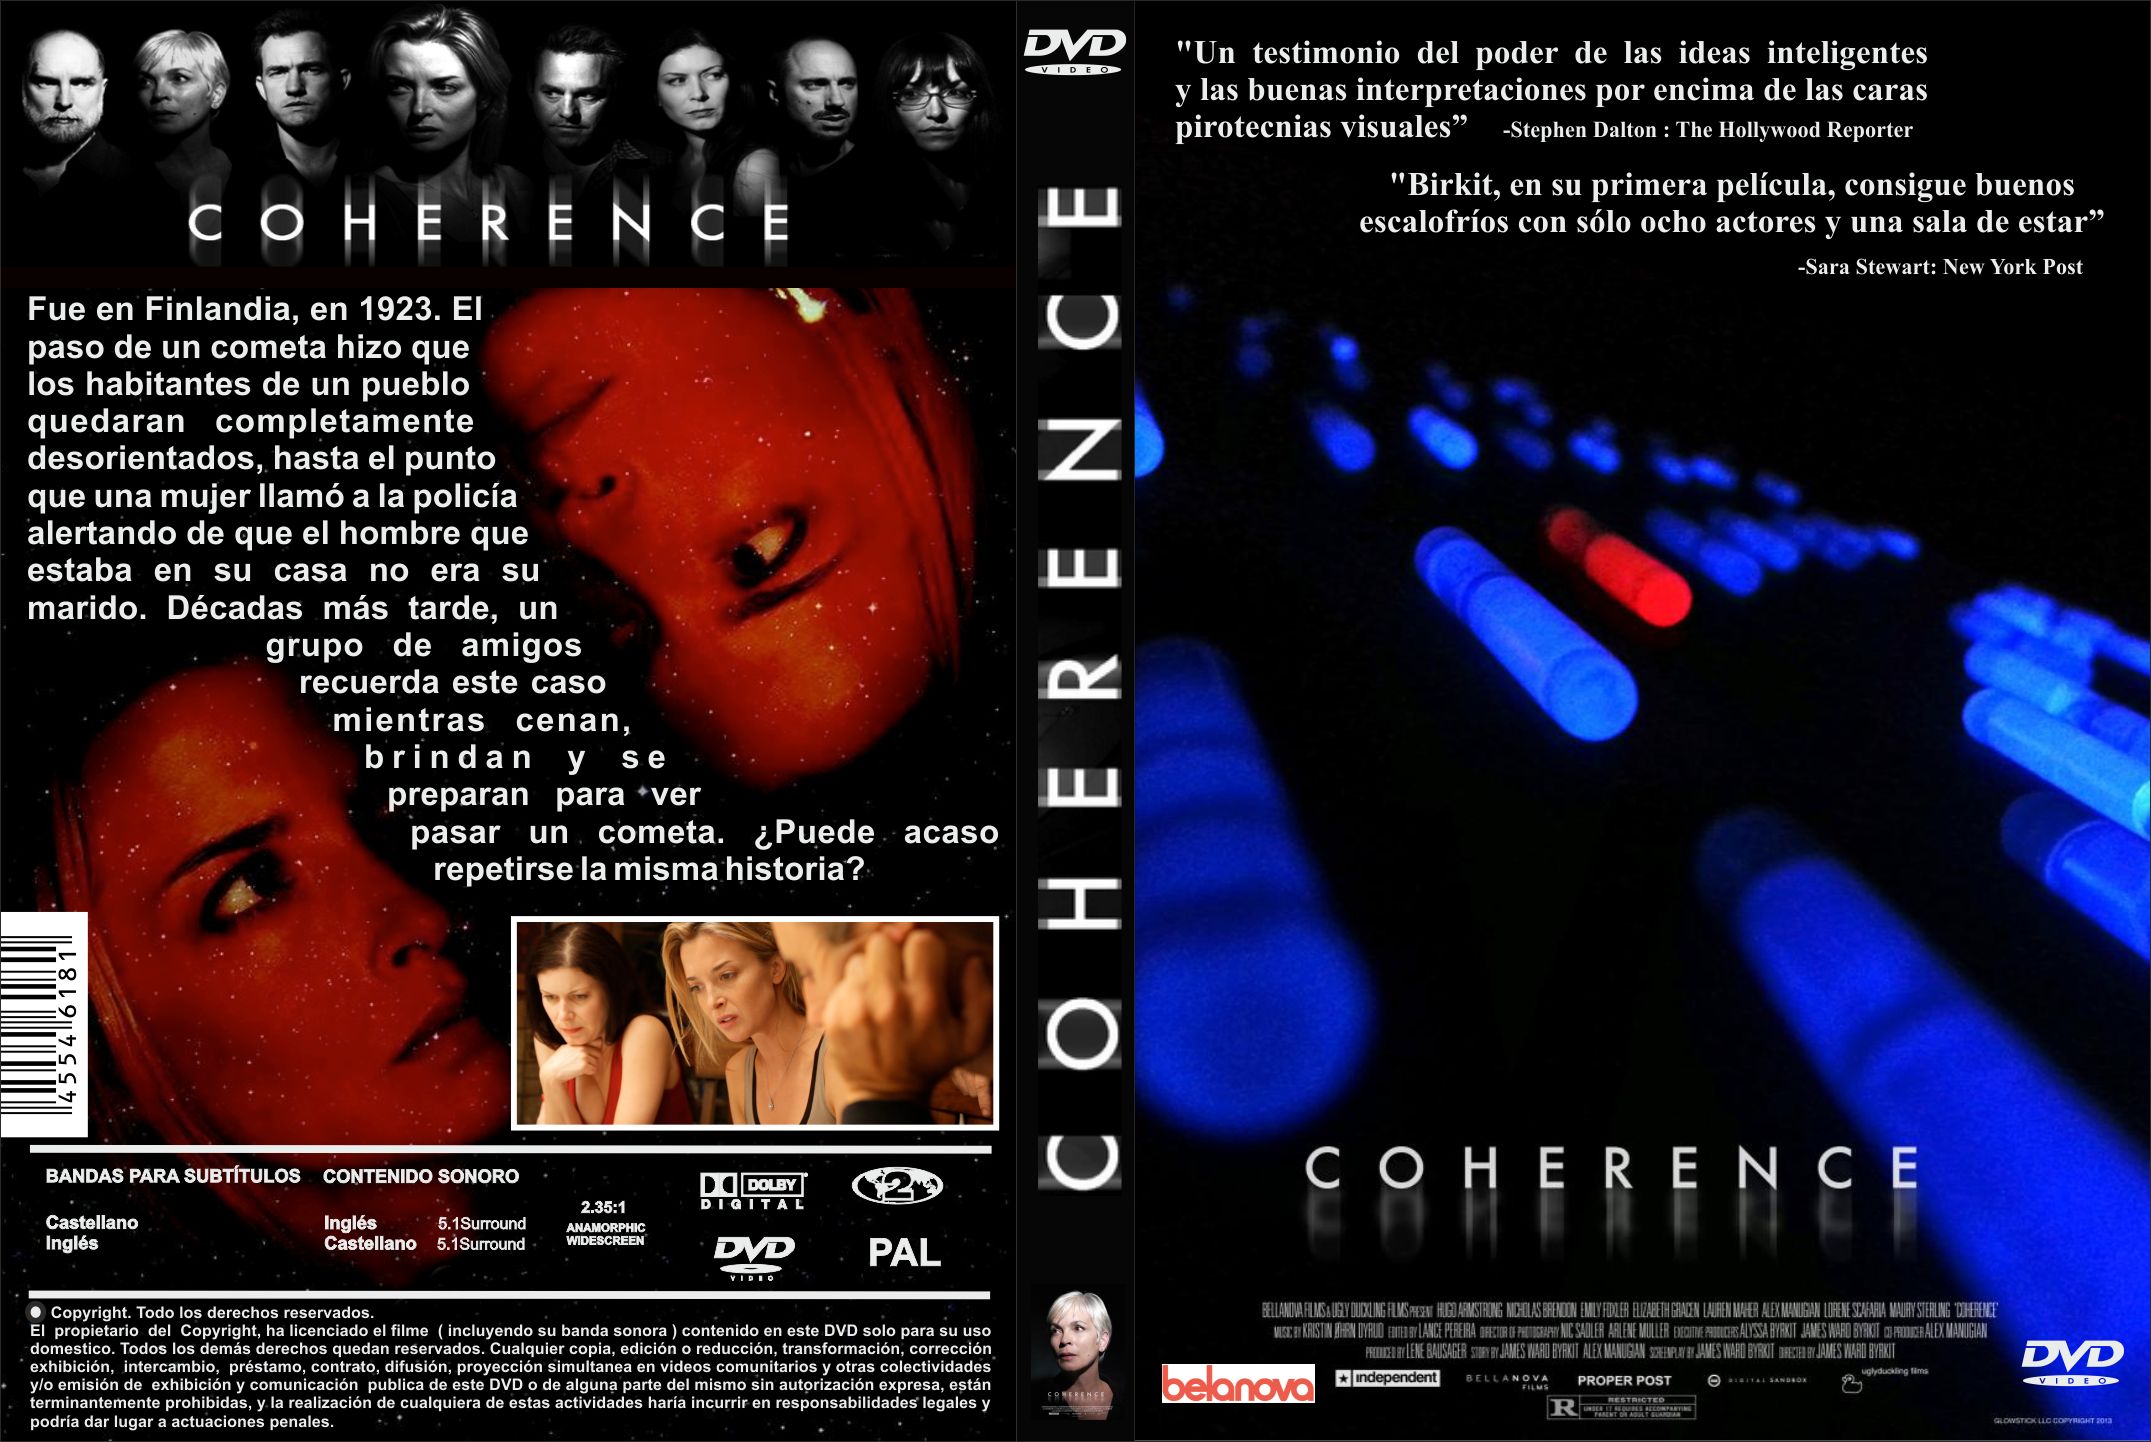 Coherence #4